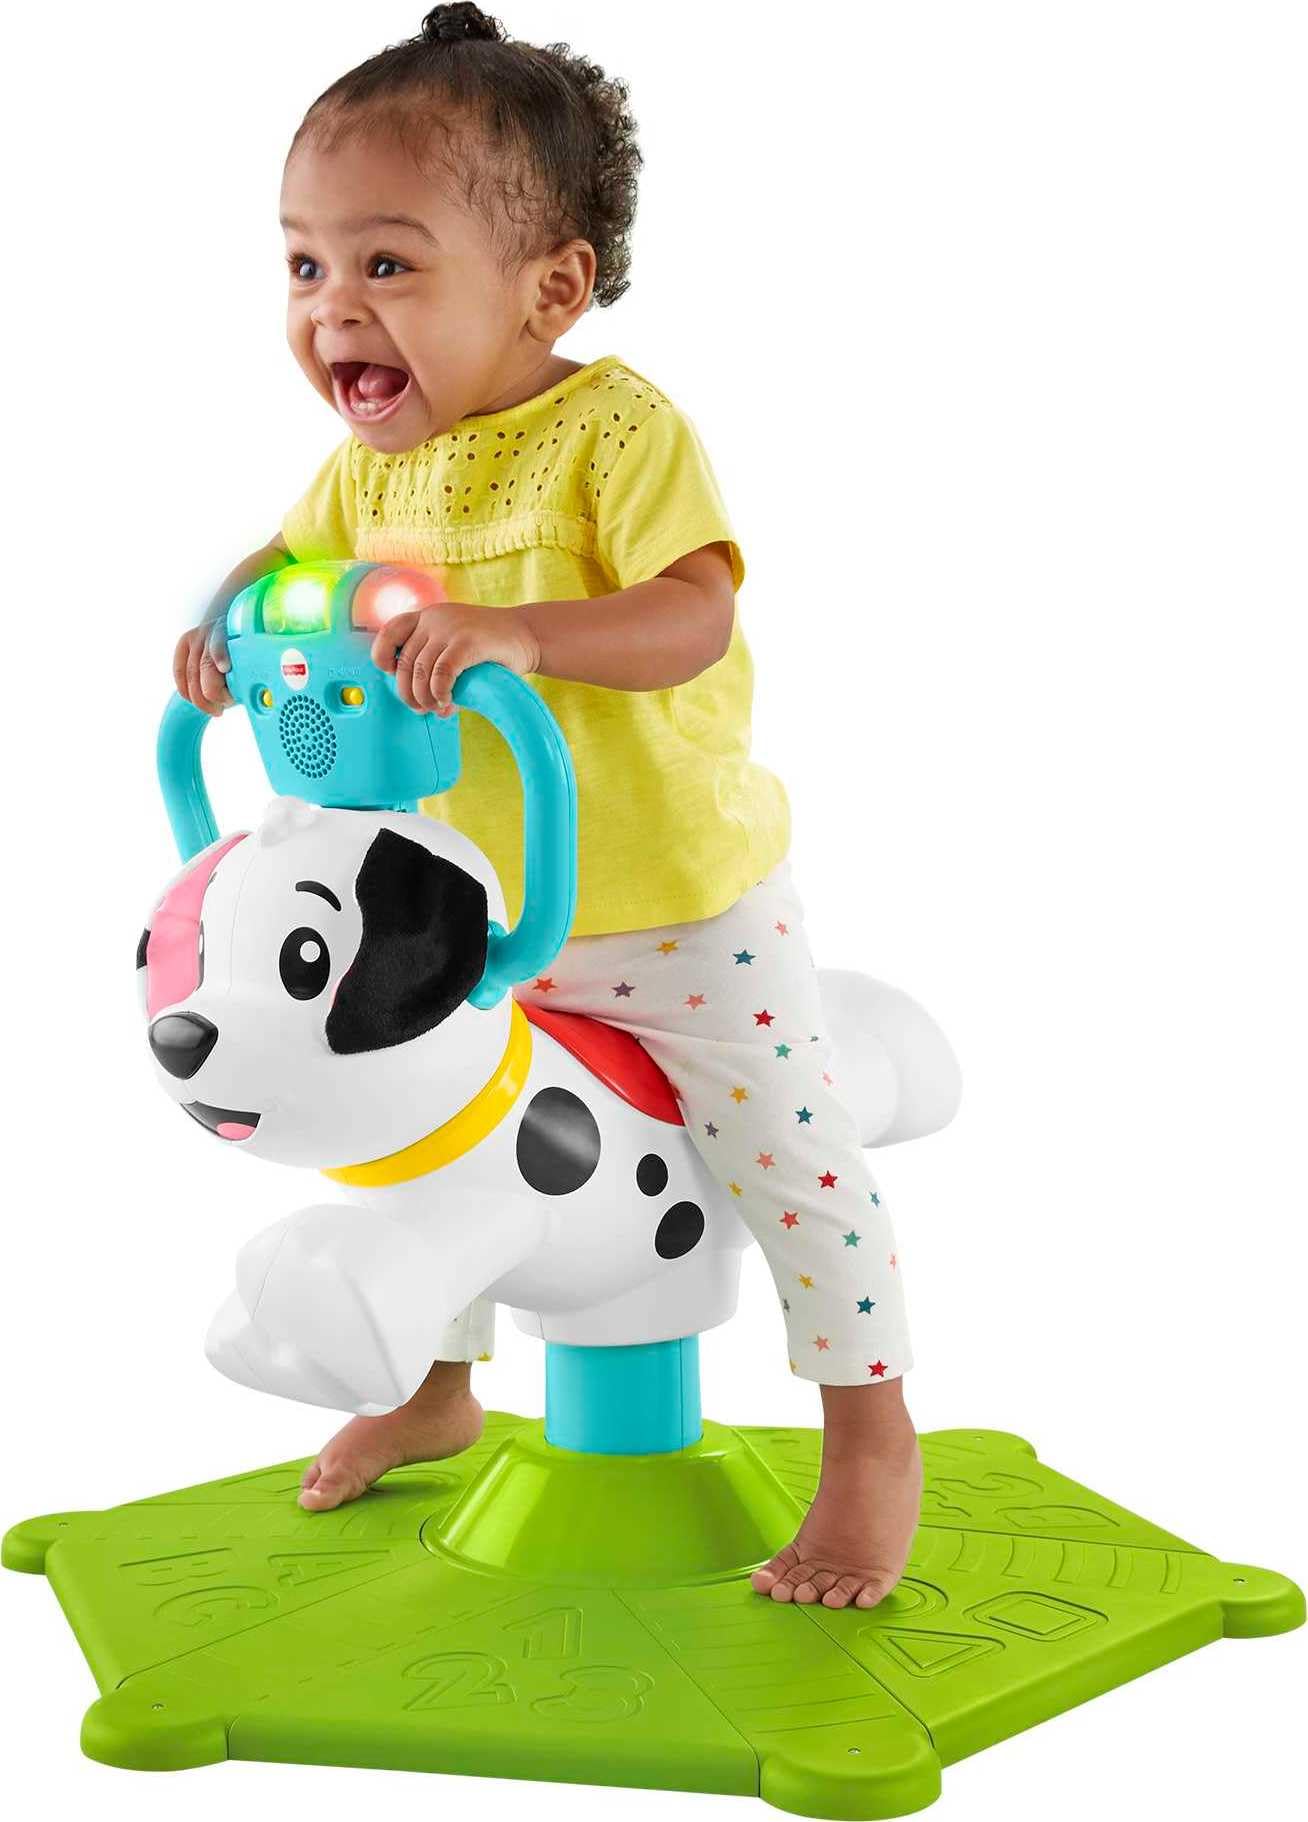 Fisher-Price Toddler Ride-On Learning Toy, Bounce and Spin Puppy Stationary Musical Bouncer for Babies and Toddlers Ages 12+ Months